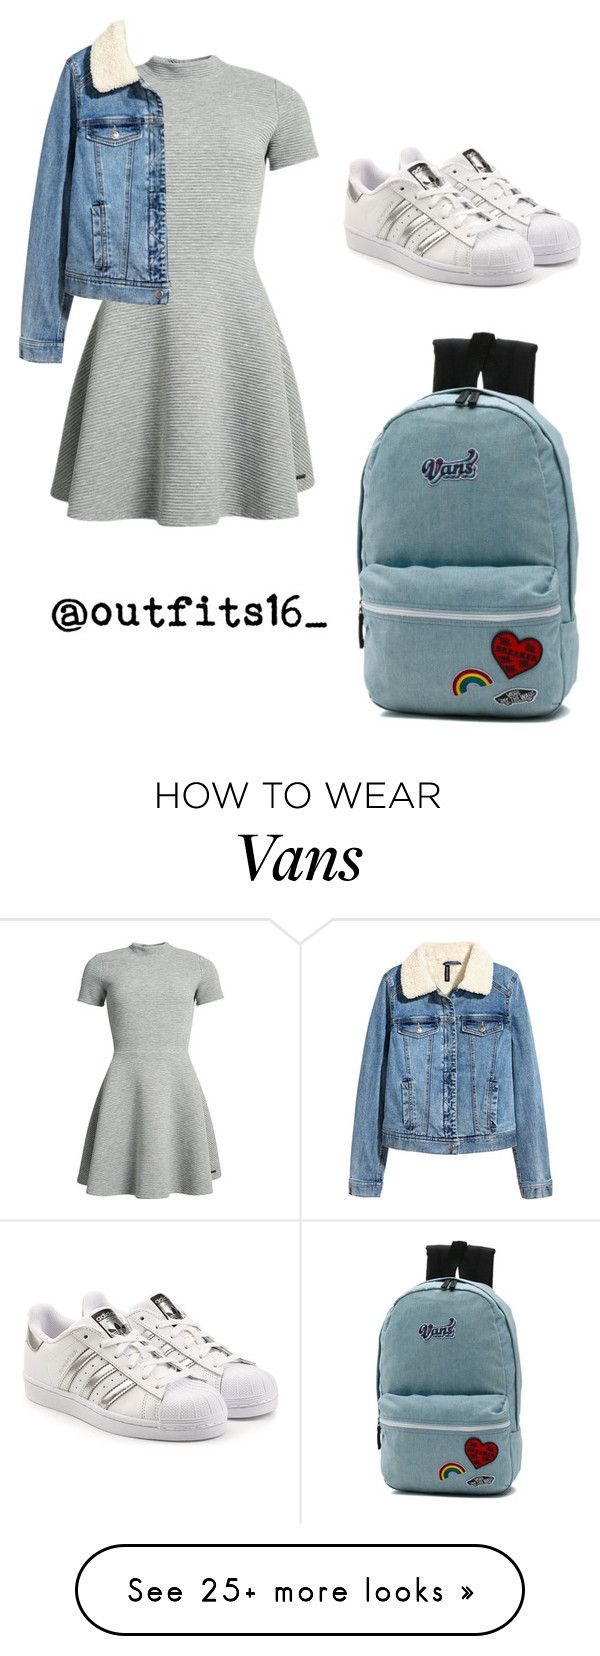 “Untitled #407” by merywalls02 on Polyvore featuring Superdry, H&M, adidas Originals and Vans